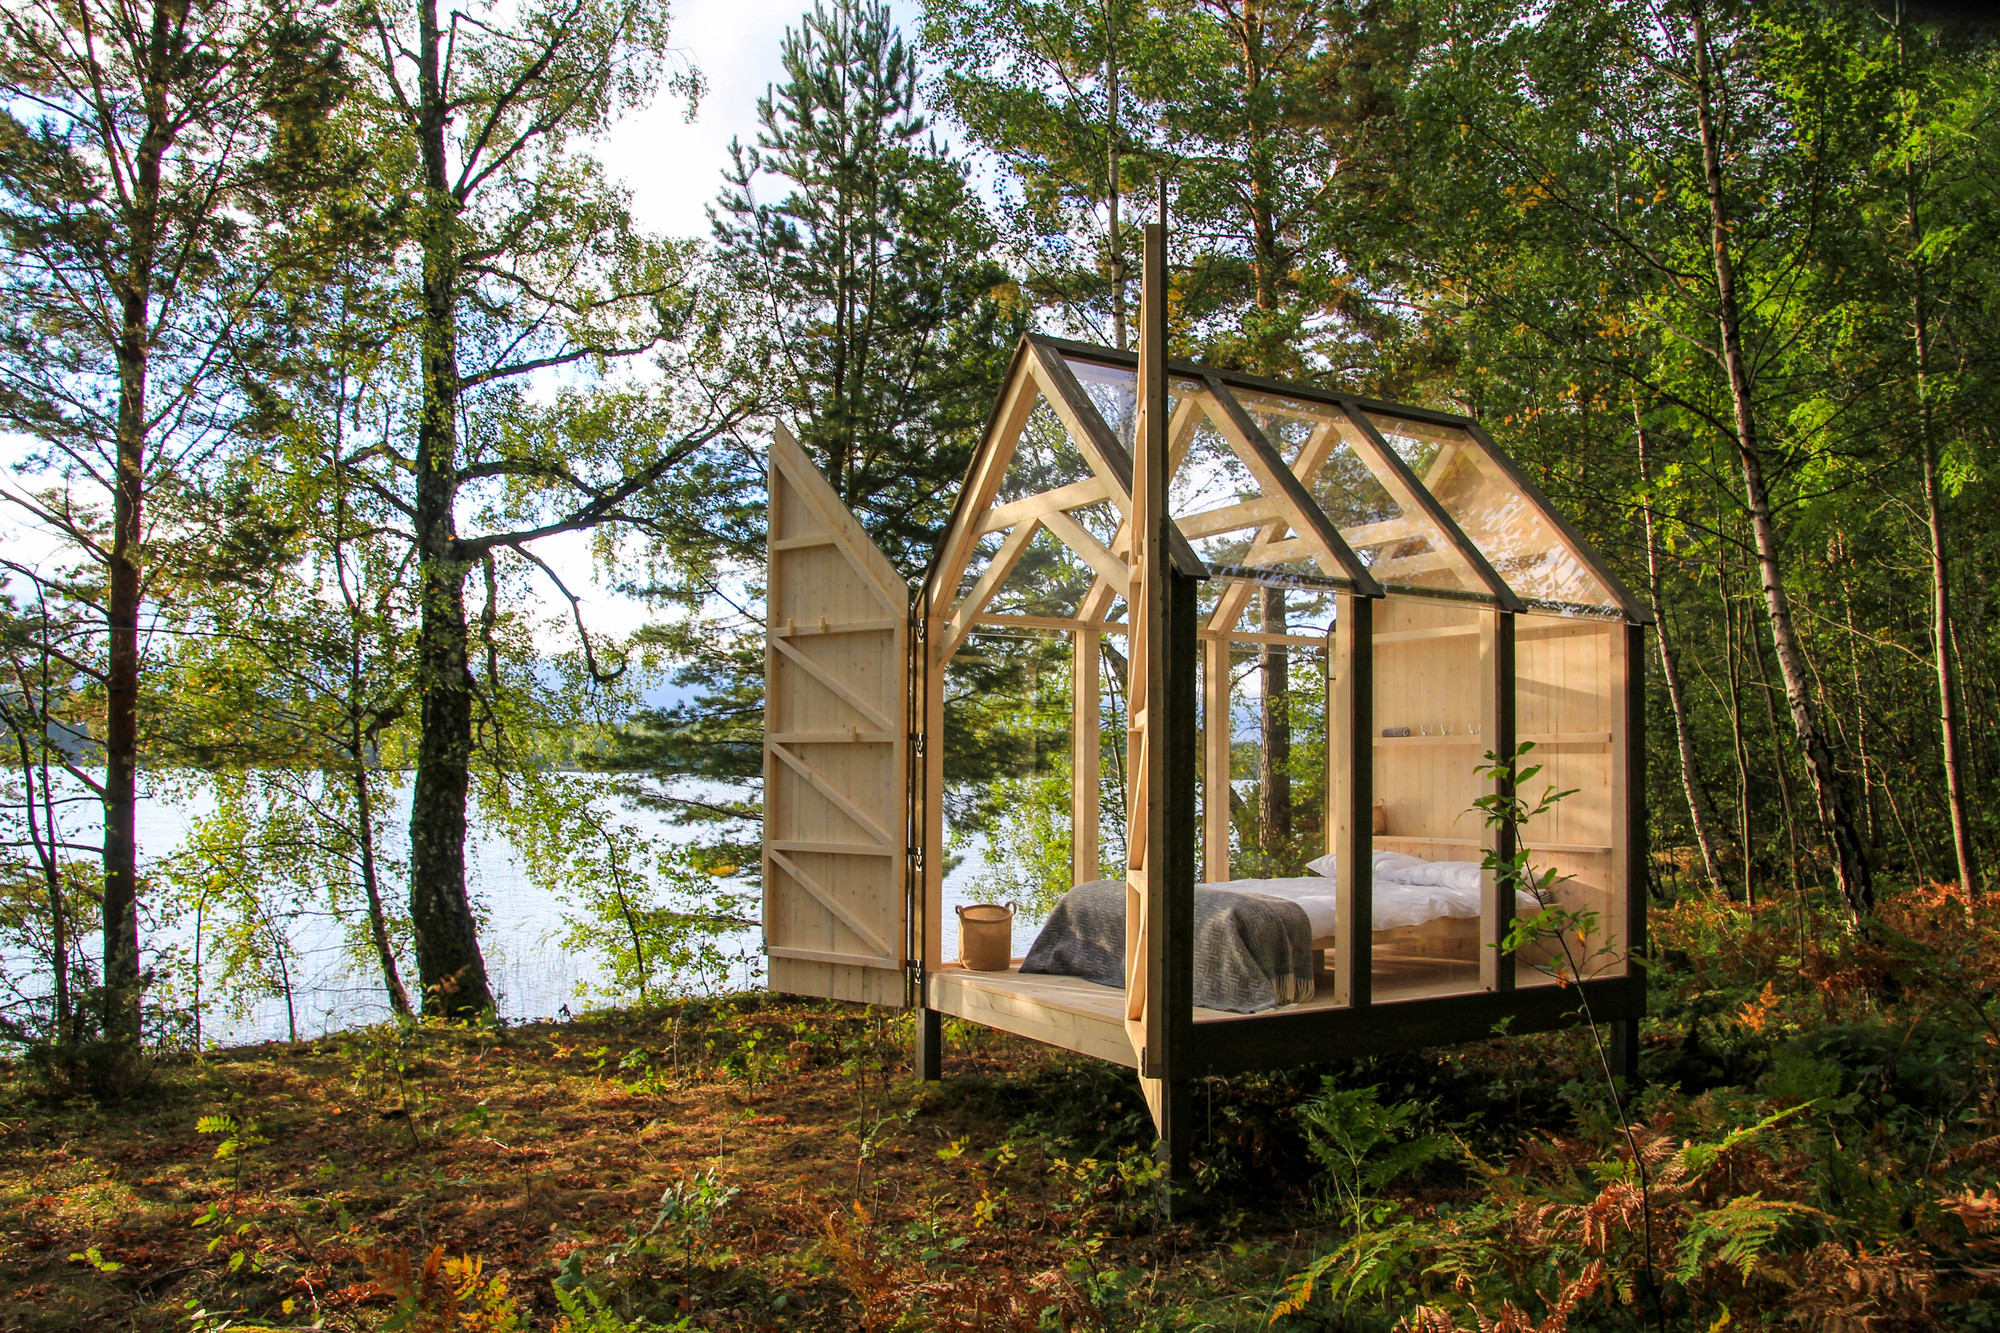 72h Cabin / JeanArch | ArchDaily